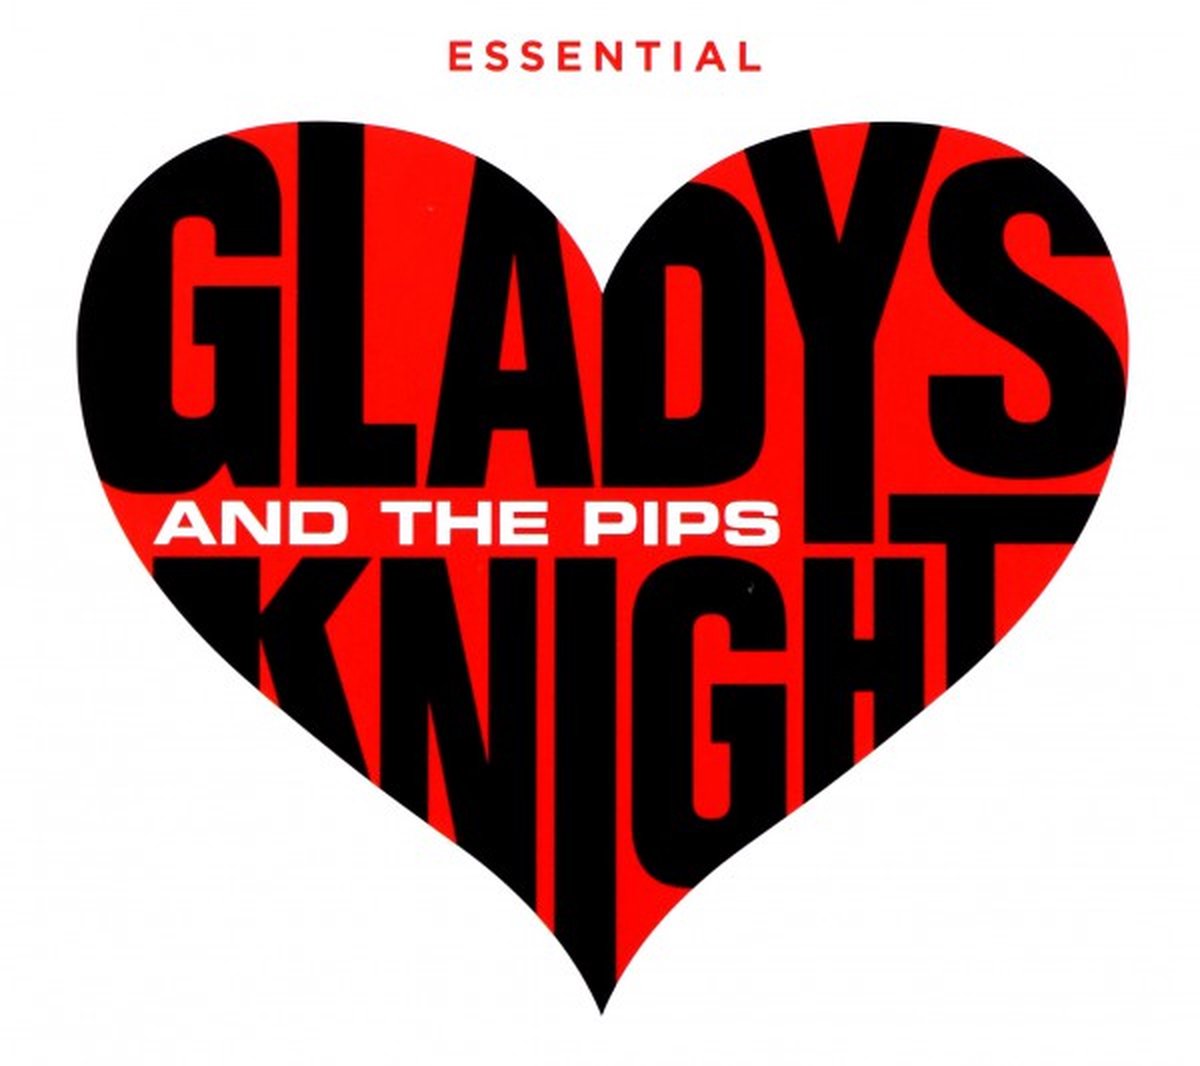 Gladys Knight & The Pips: Essential [3CD] - Gladys Knight & the Pips